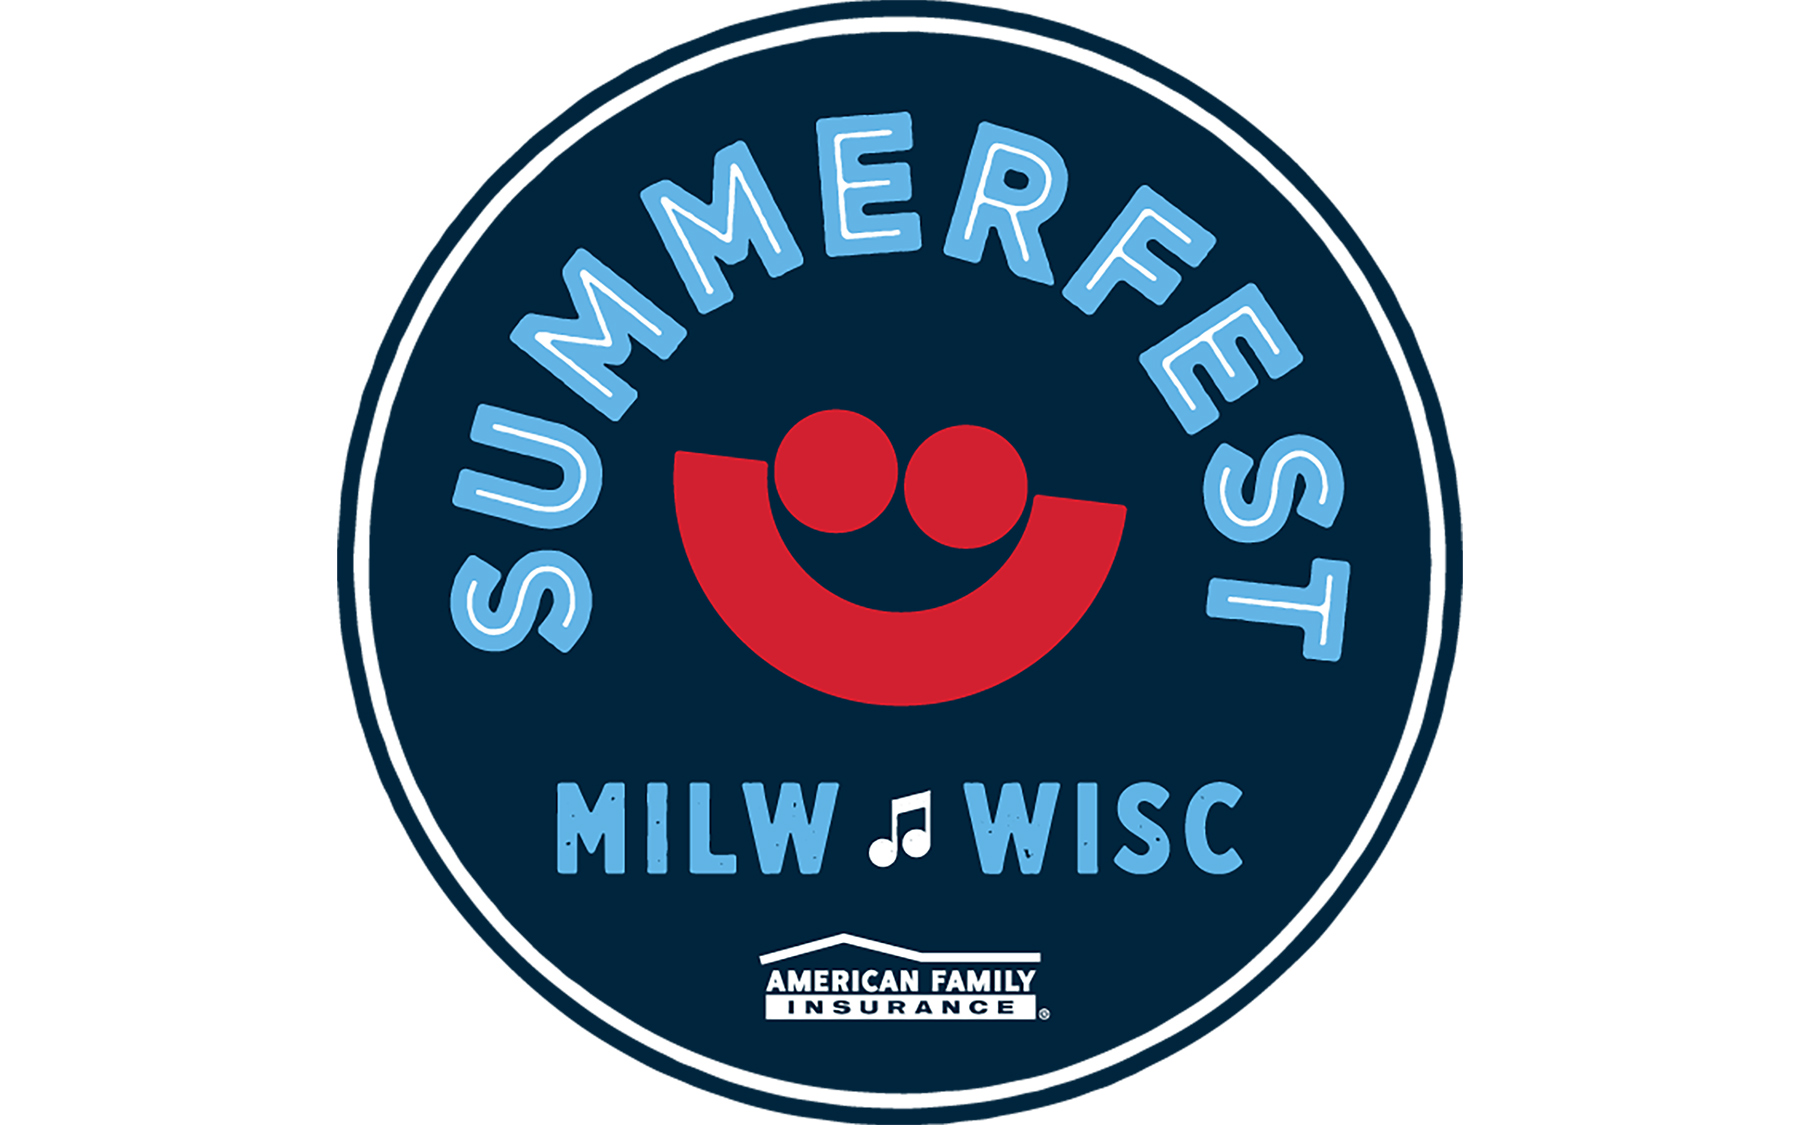 Summerfest Seating Chart Seat Numbers